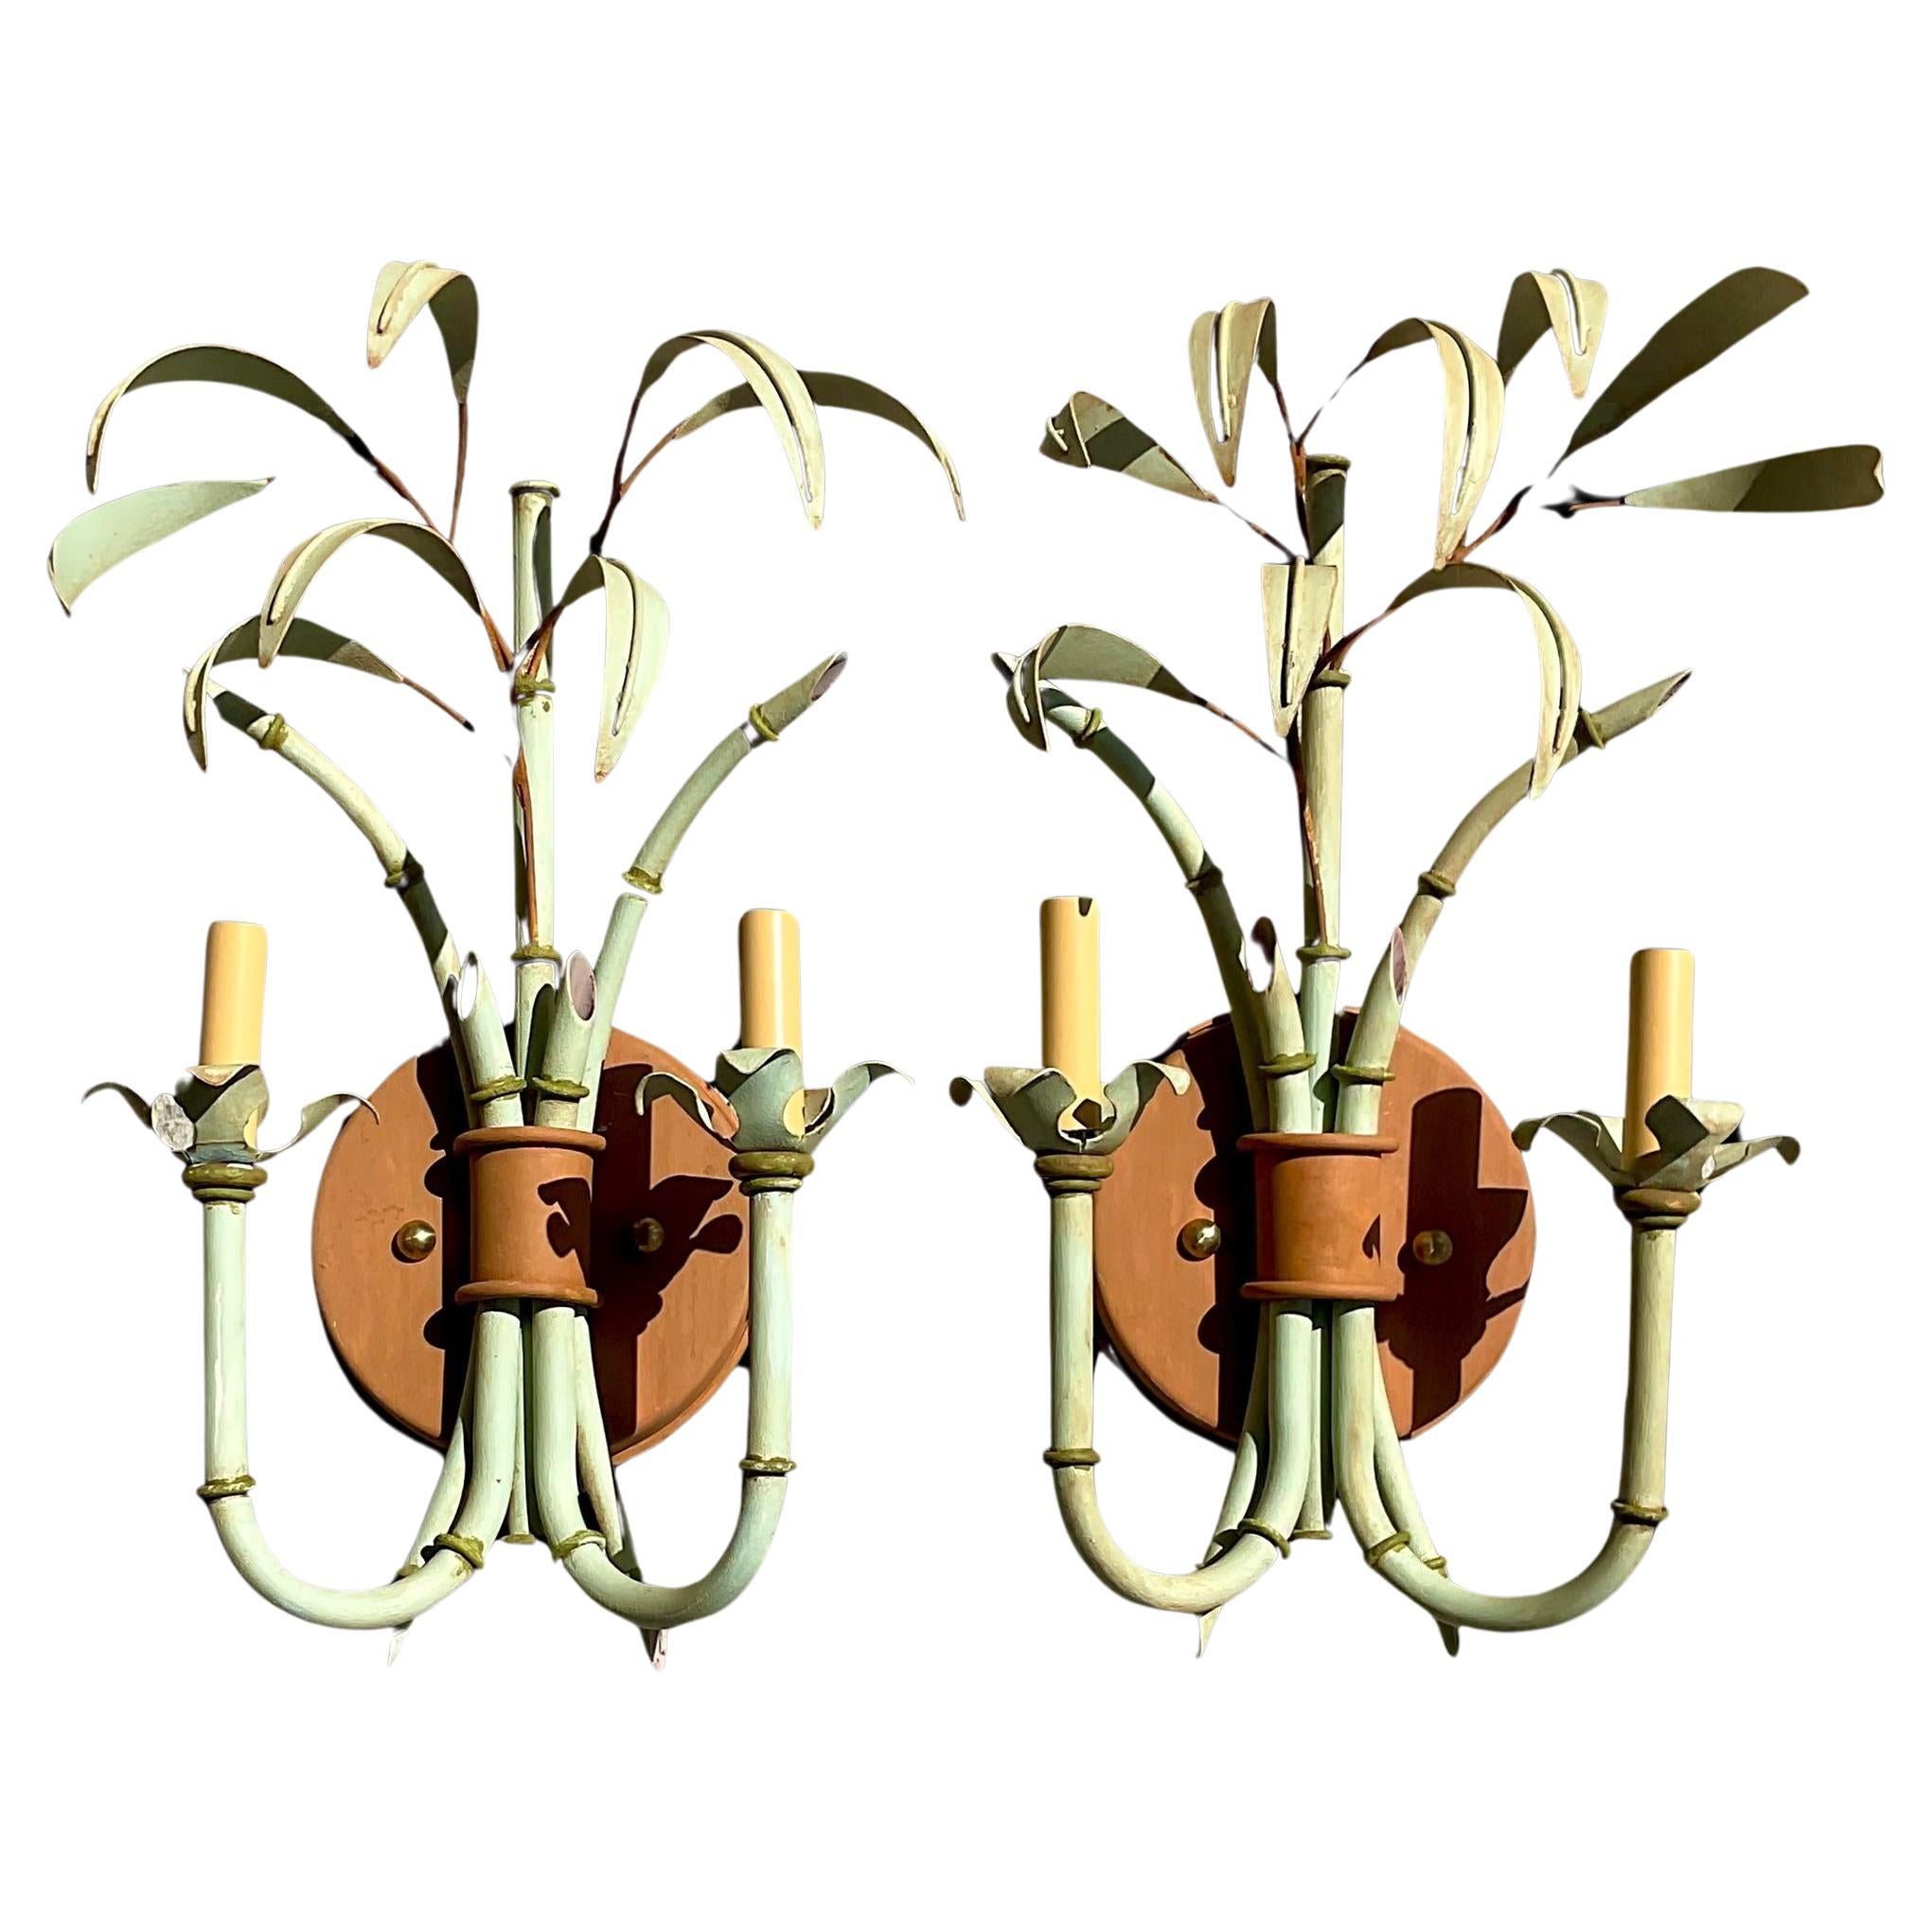 Vintage Coastal Bamboo Tole Wall Sconces - a Pair For Sale